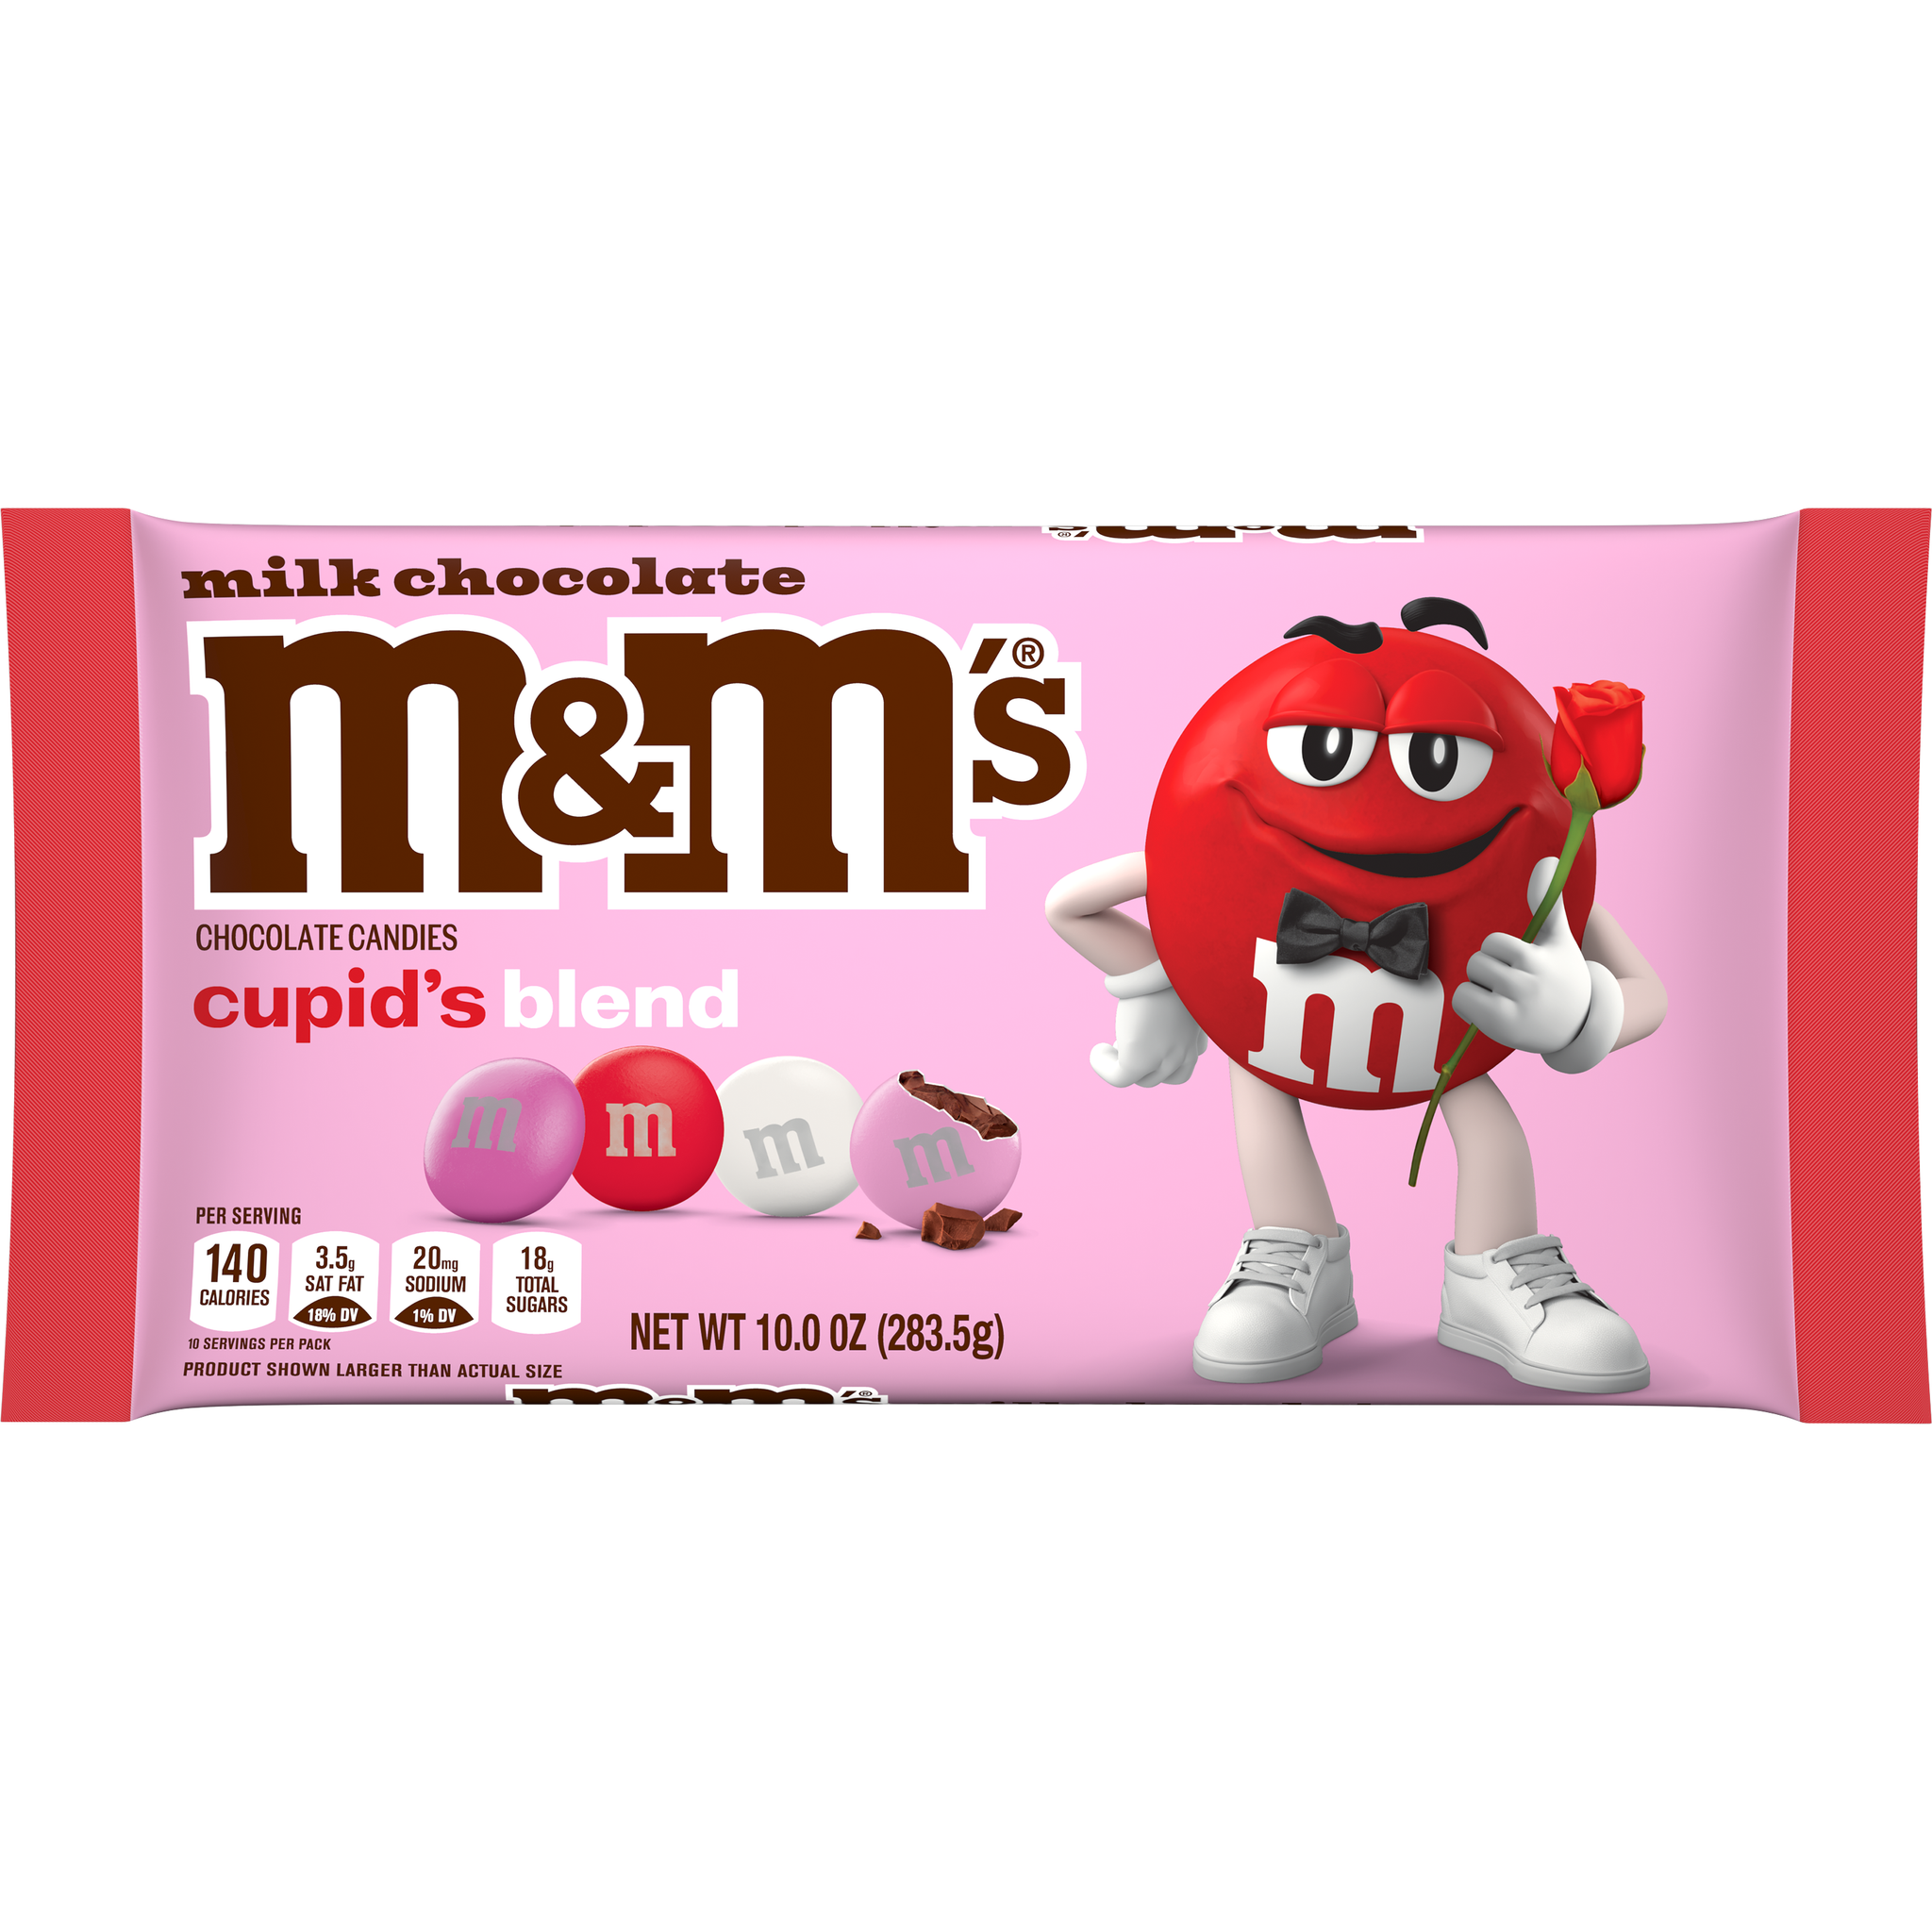 M&M'S Chocolate in Candy 